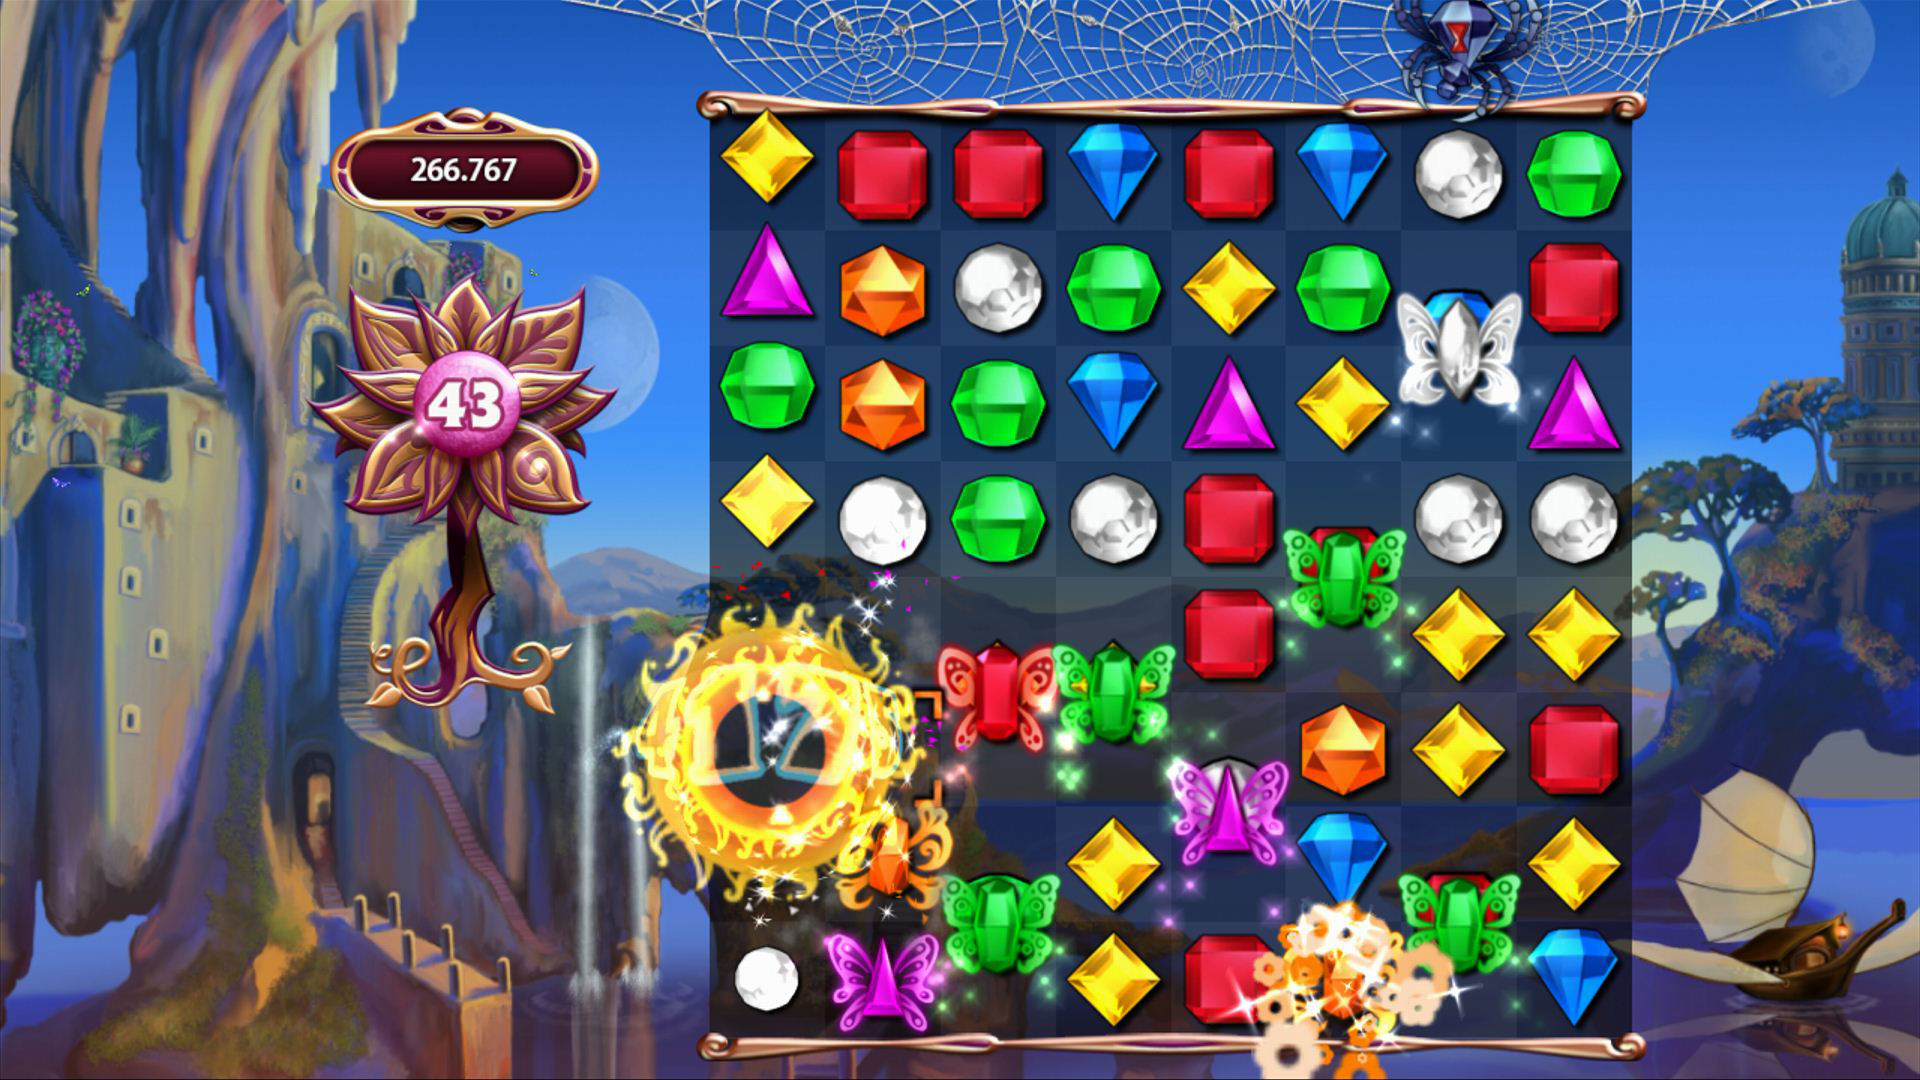 bejeweled 3 quest mode free online